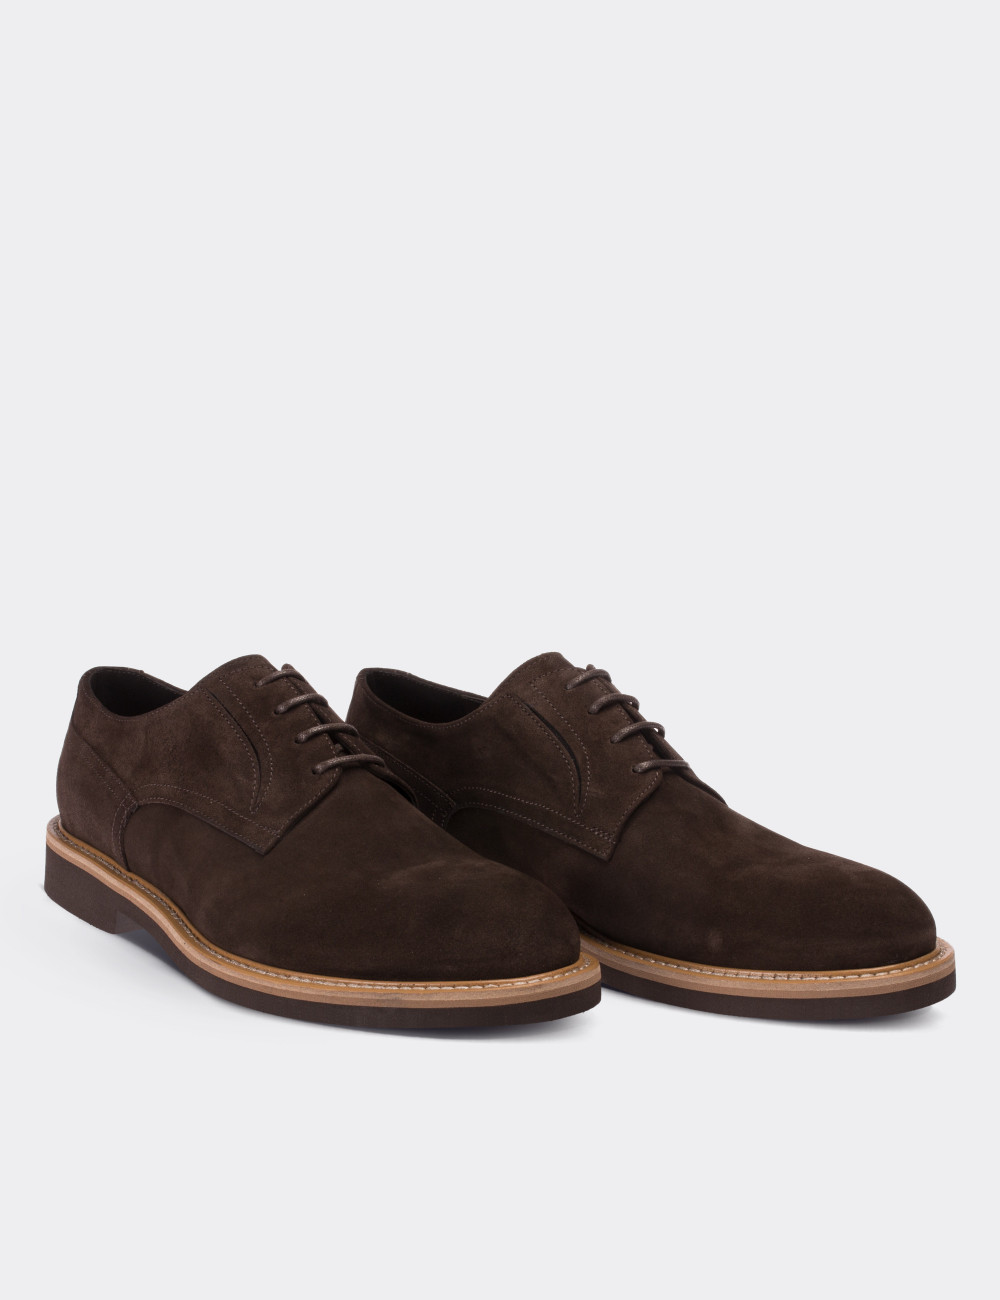 Brown Suede Leather Lace-up Shoes - 01294MKHVE13